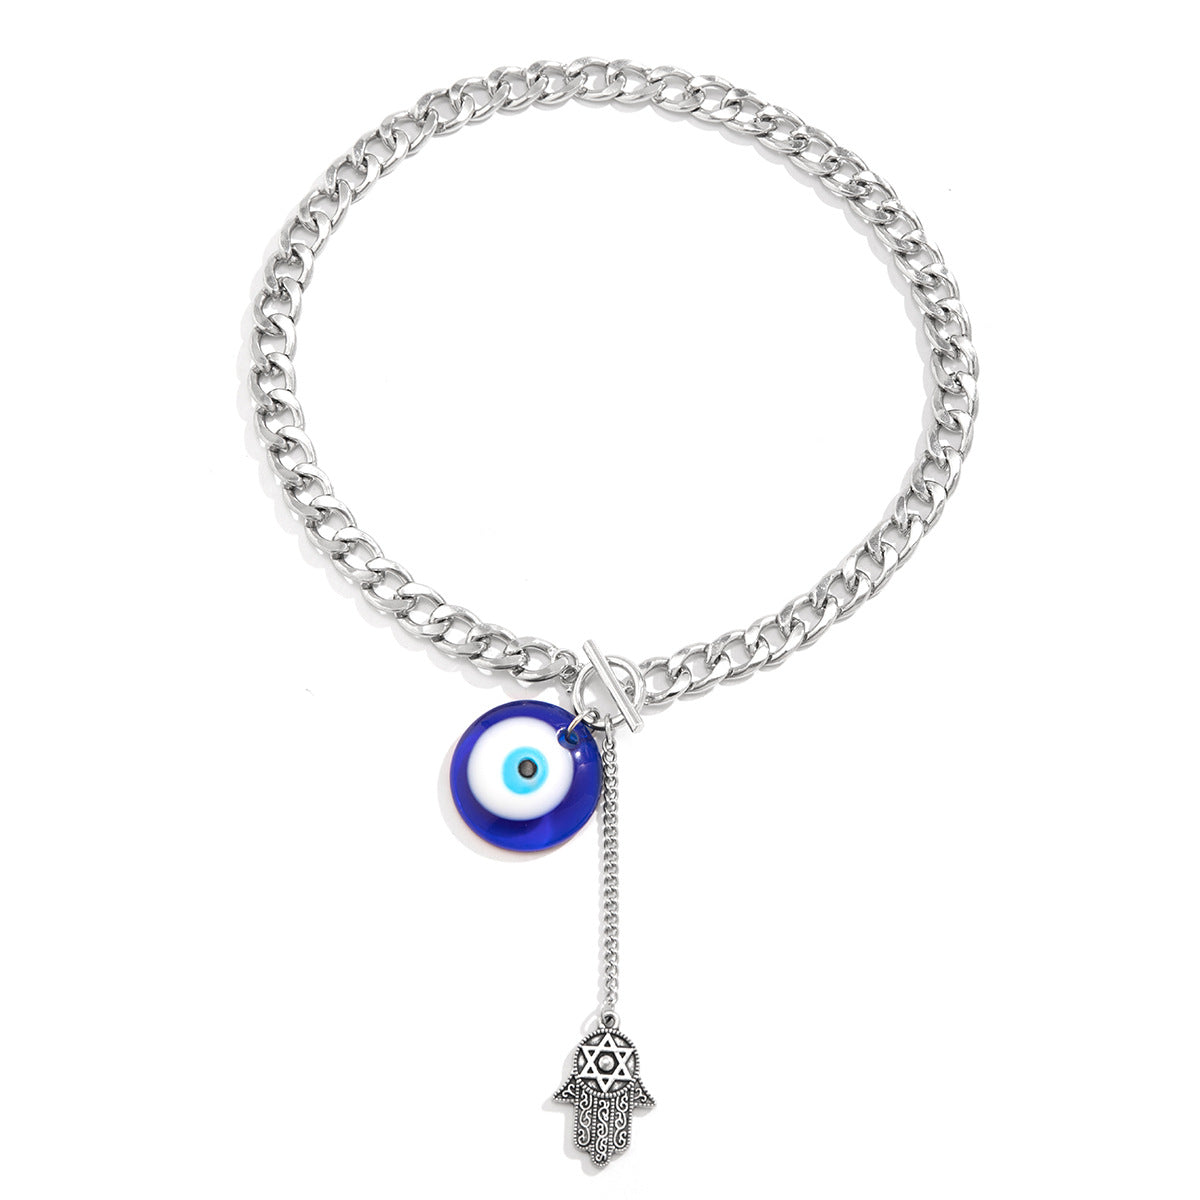 Blue Eye Pendant Necklace with a Touch of Bergamot Flavor